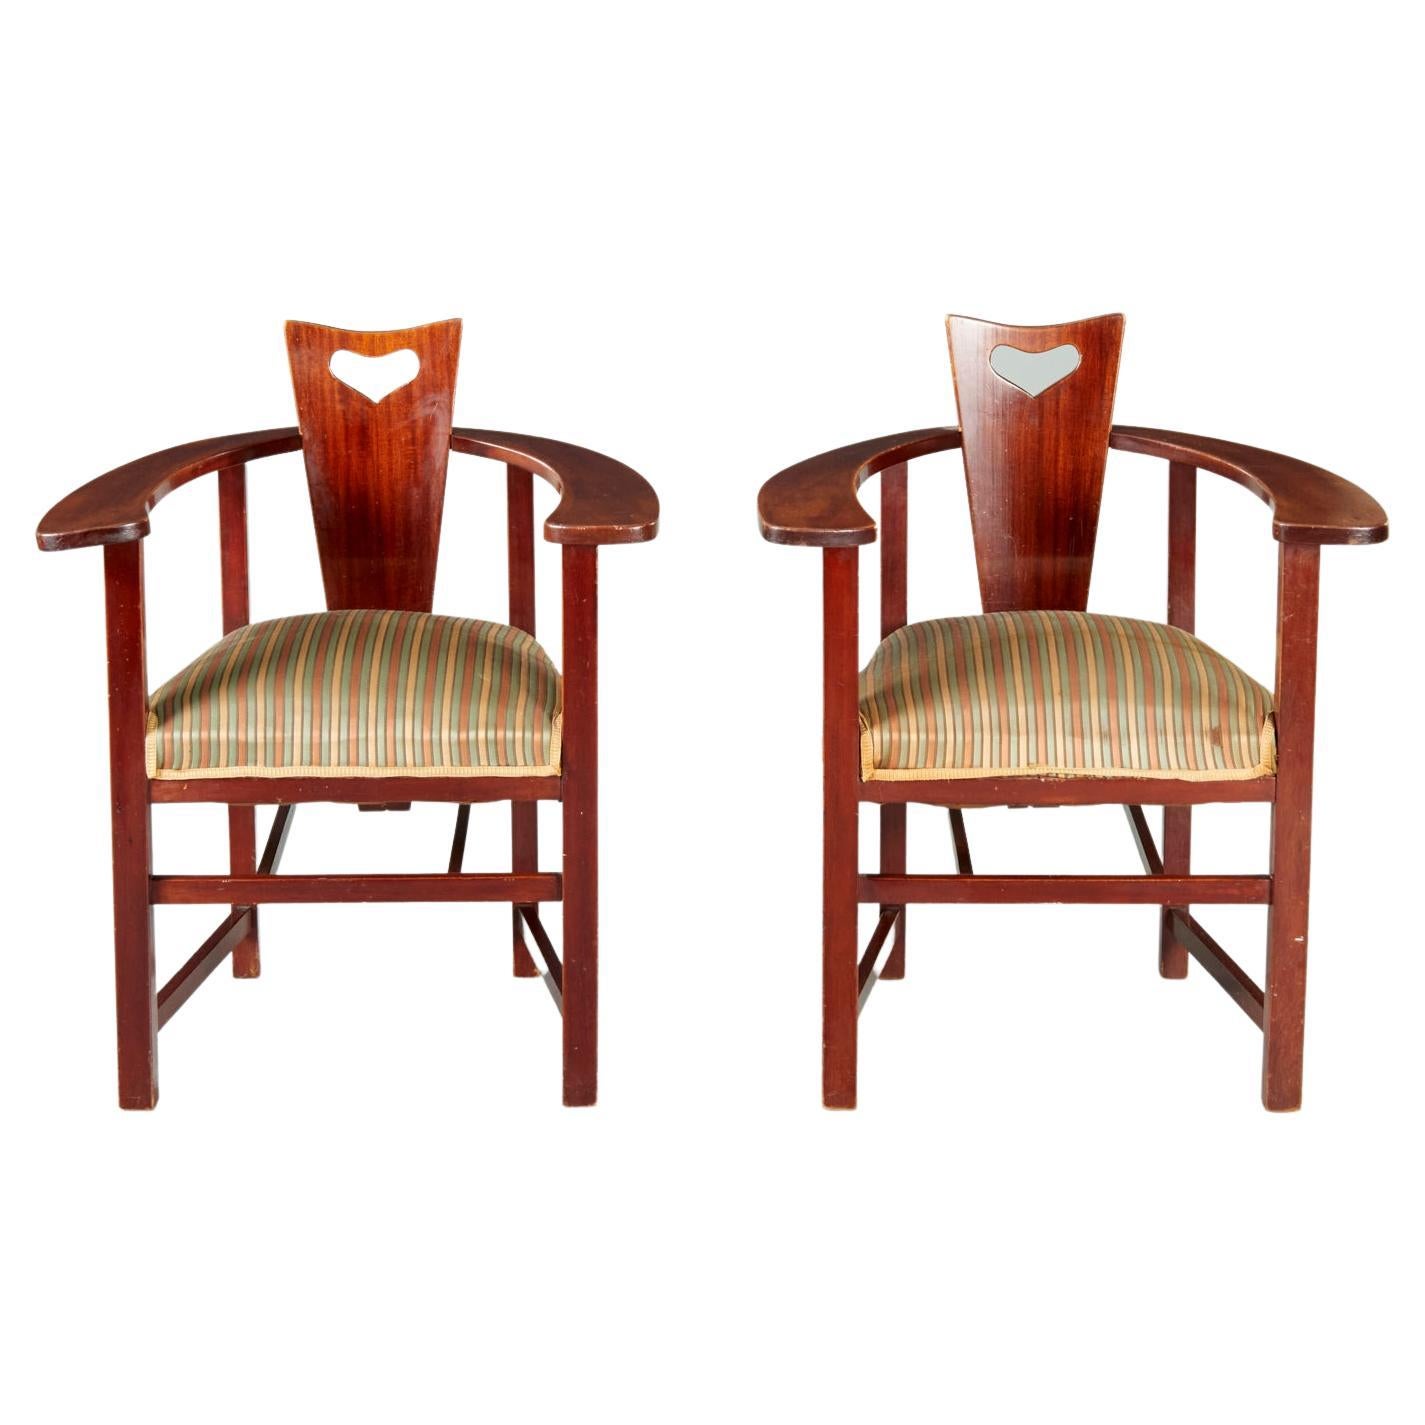 Antique Mahogany and Silk Upholstered George Walton Abingwood Chairs, a Pair